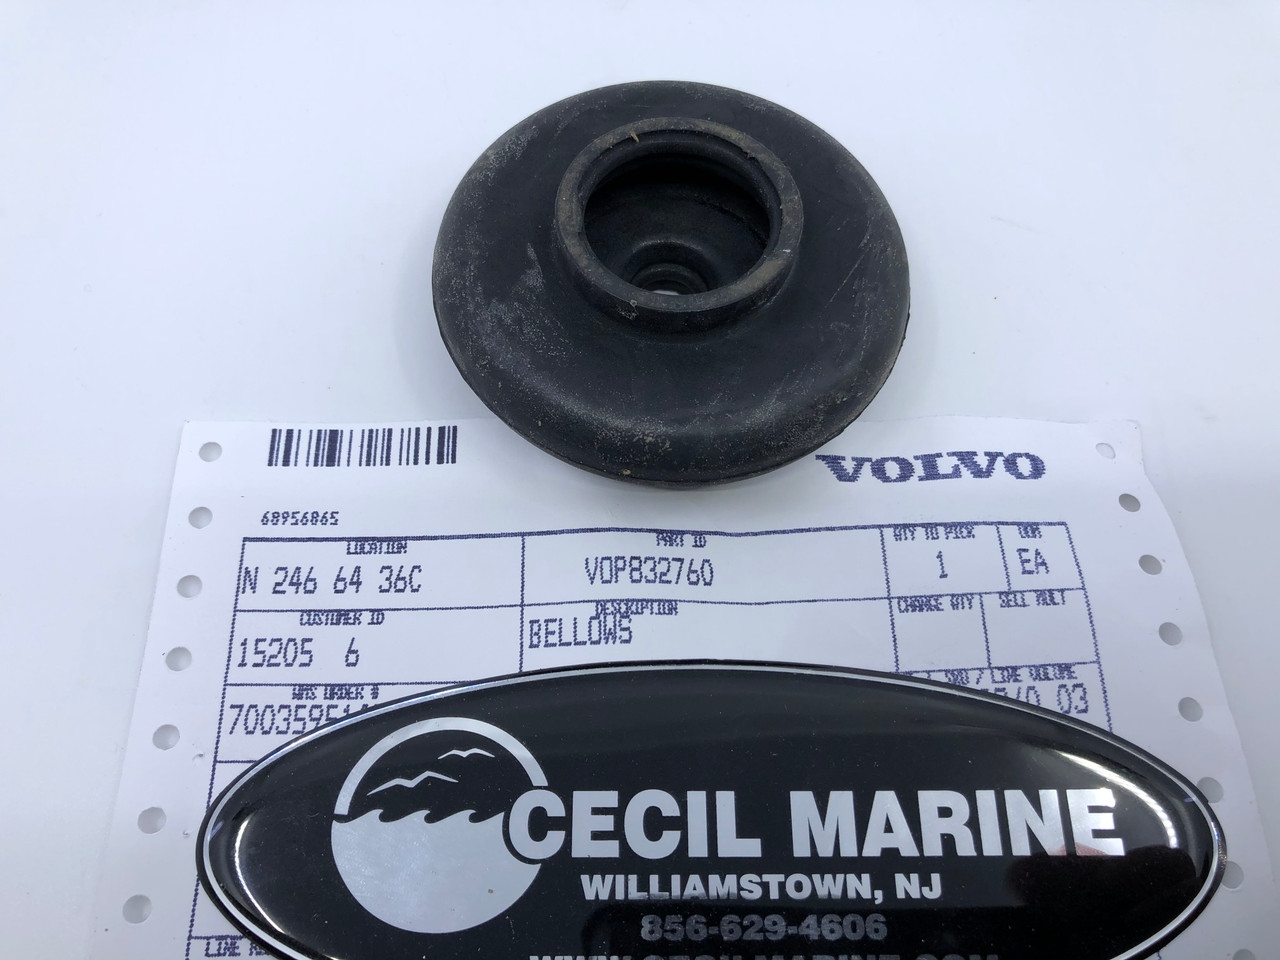 $119.88* GENUINE VOLVO no tax*  BELLOWS 832760 *Sorry this part is no longer available from Volvo